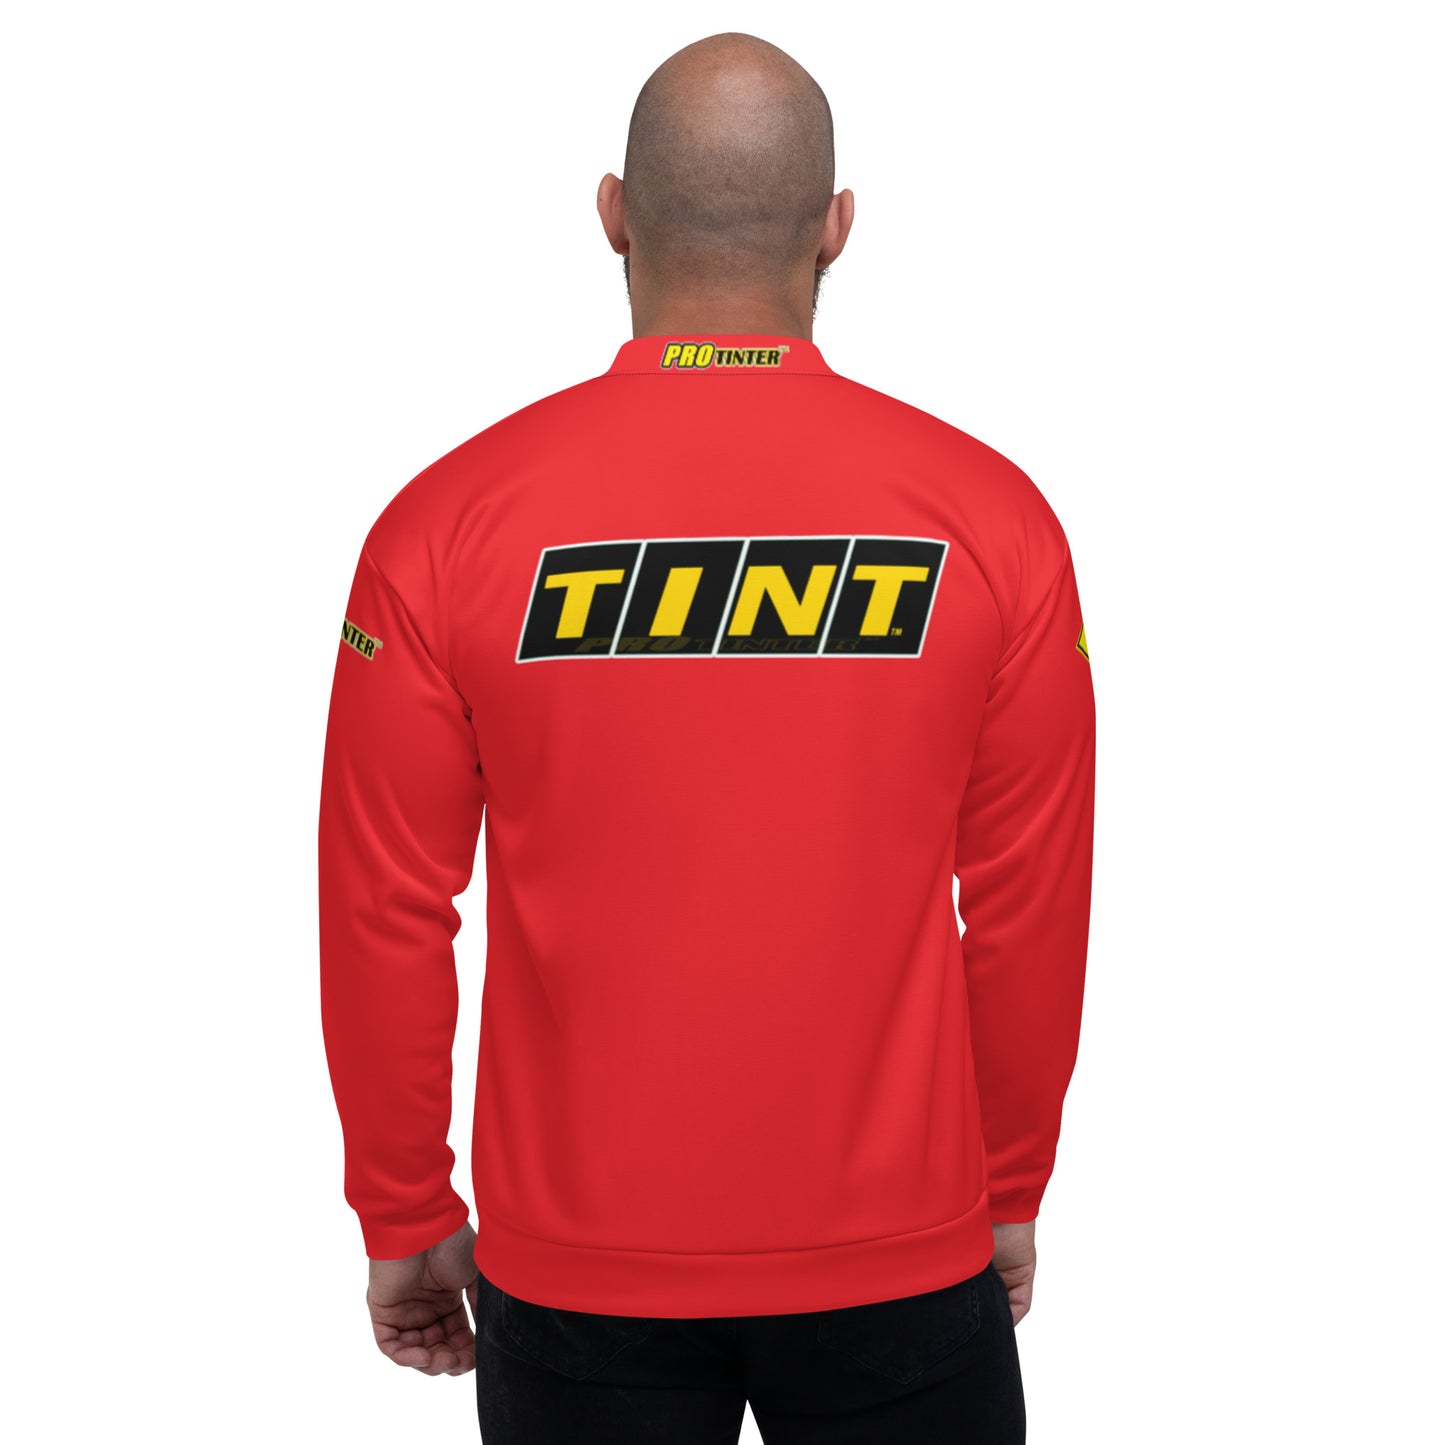 TINT with OLFA by Pro Tinter (RED) Unisex Bomber Jacket